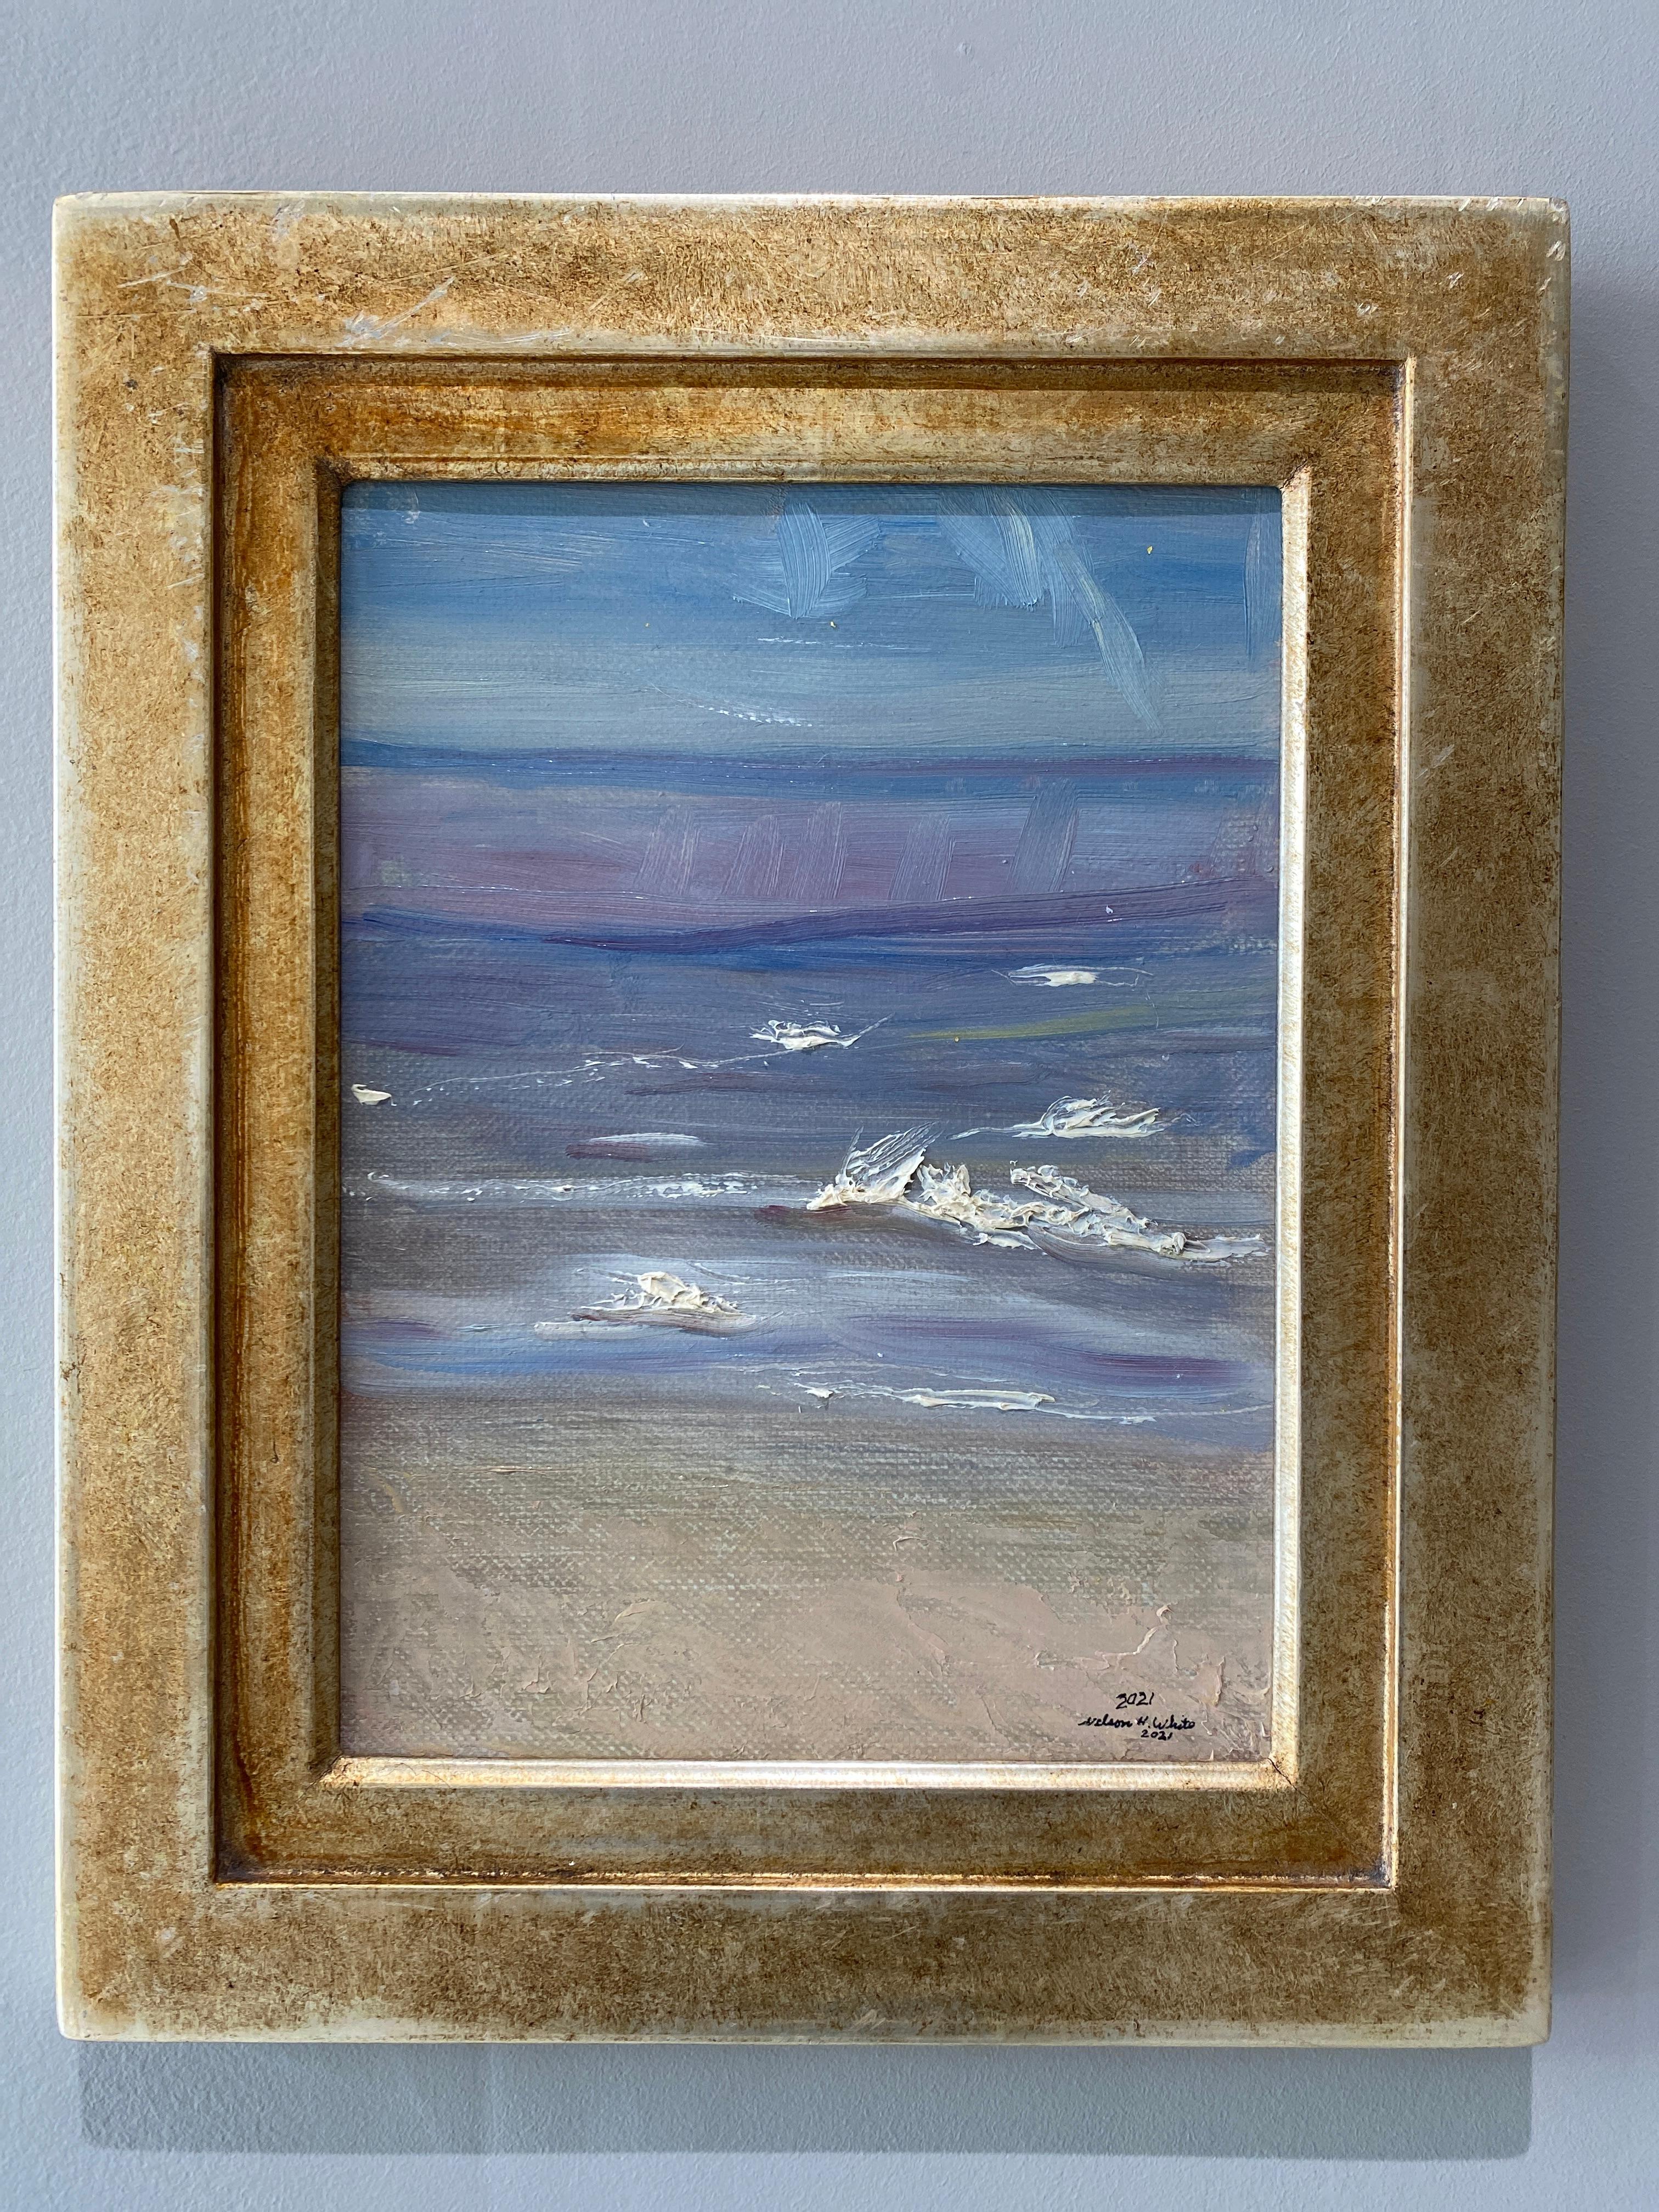 The Waves 09.18.2021 - Impressionist Painting by Nelson White